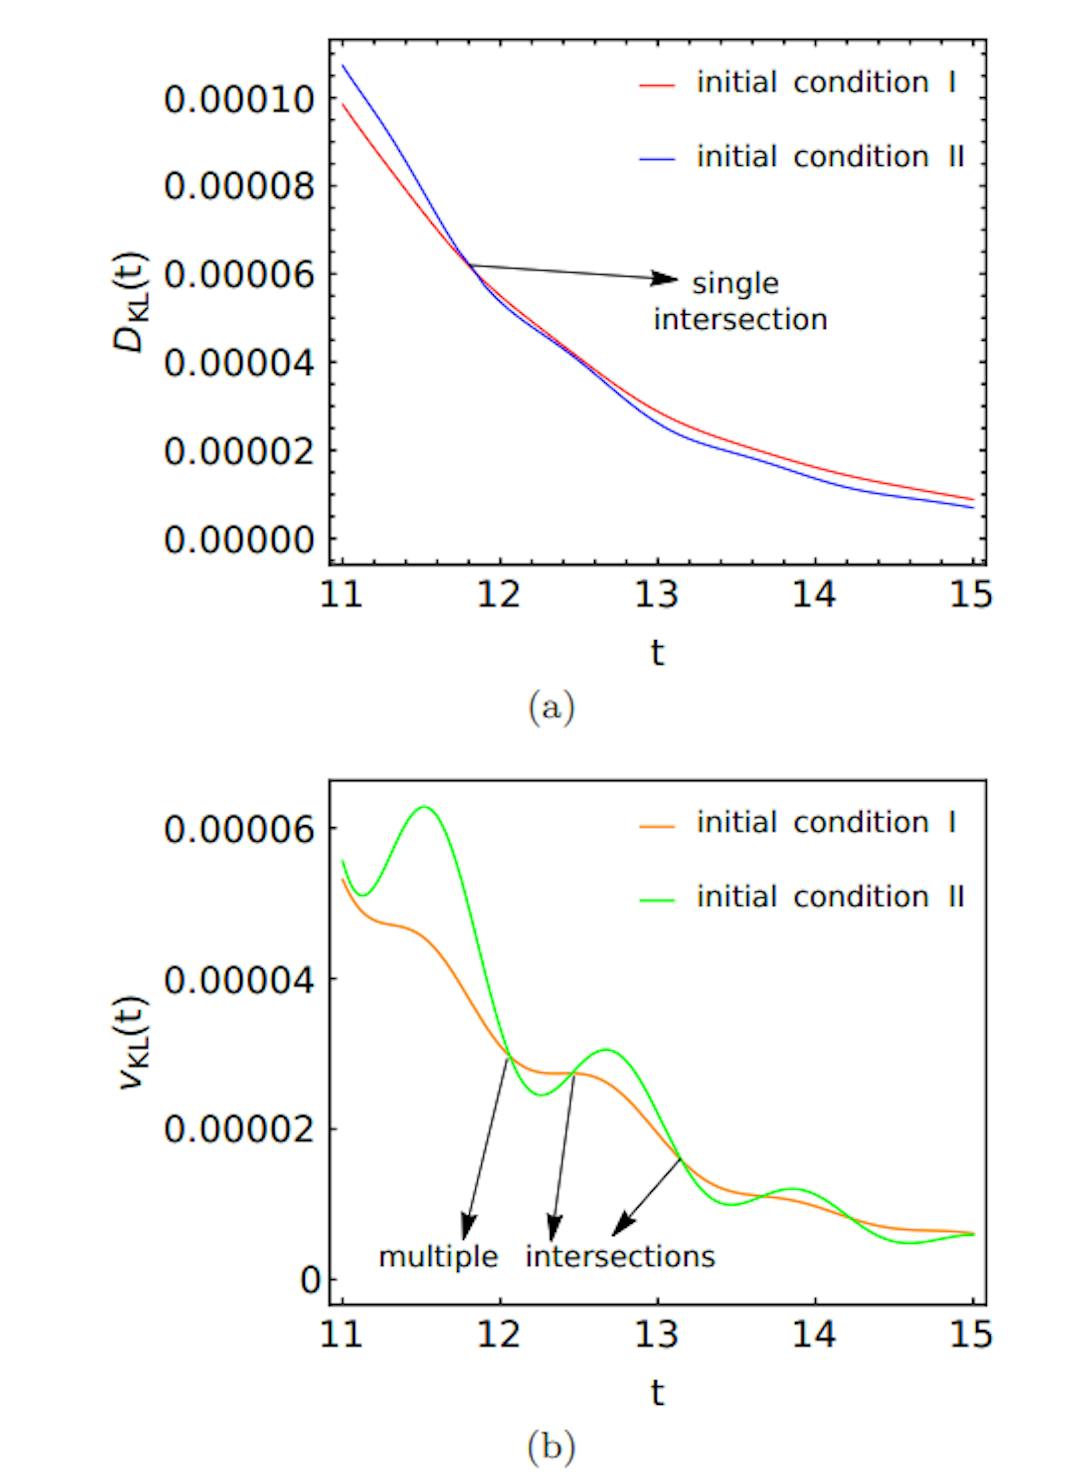 FIG. 11. The figure (a) shows single intersection between the KL divergence of the two copies I and II and thereby exhibit single QMPE instead of multiple QMPE. Parameters used are same as in Fig. 7 only except d˜I = 1.0. For these same parameters, the figure (b) compares the time evolution of the speeds of the two copies. Unlike the distance, the speeds intersect each other multiple times leading to multiple QMPE.